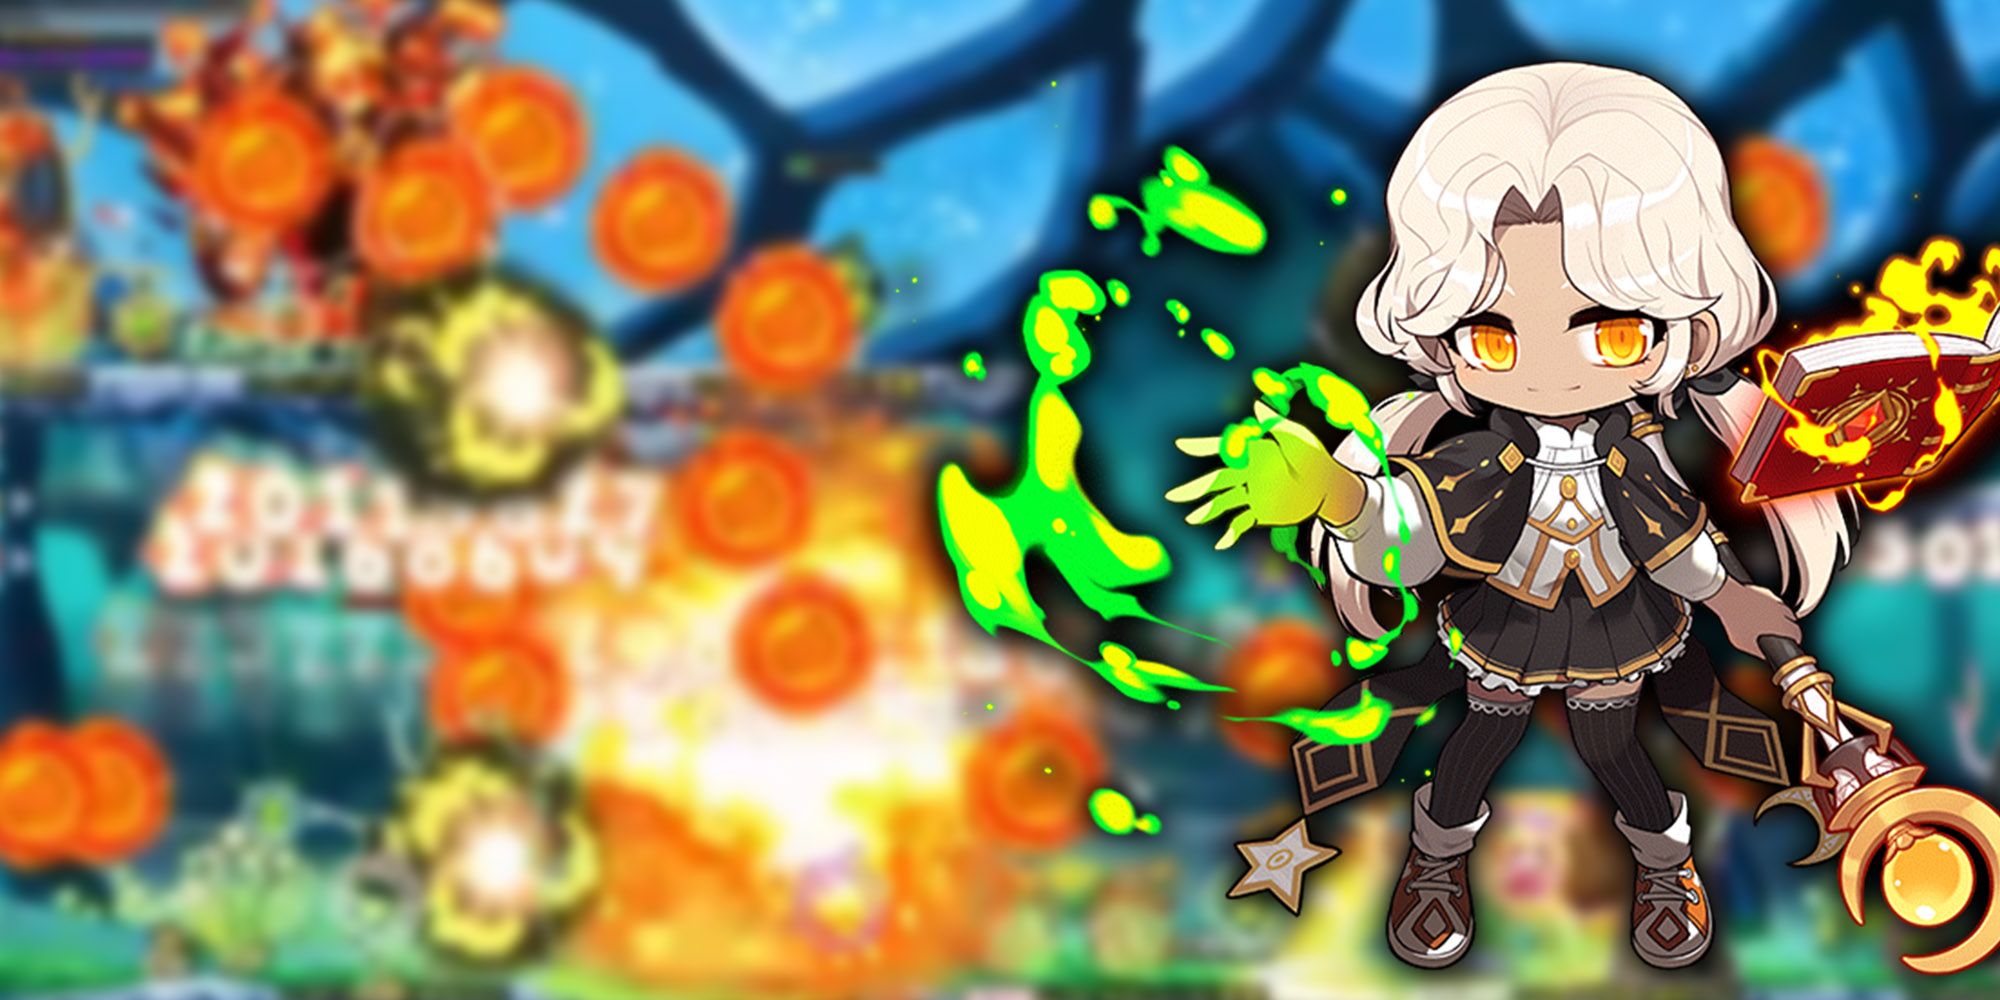 Maplestory - Fire Poison Archmage PNG Over Image Of Them Using One Of Their AoE Skills